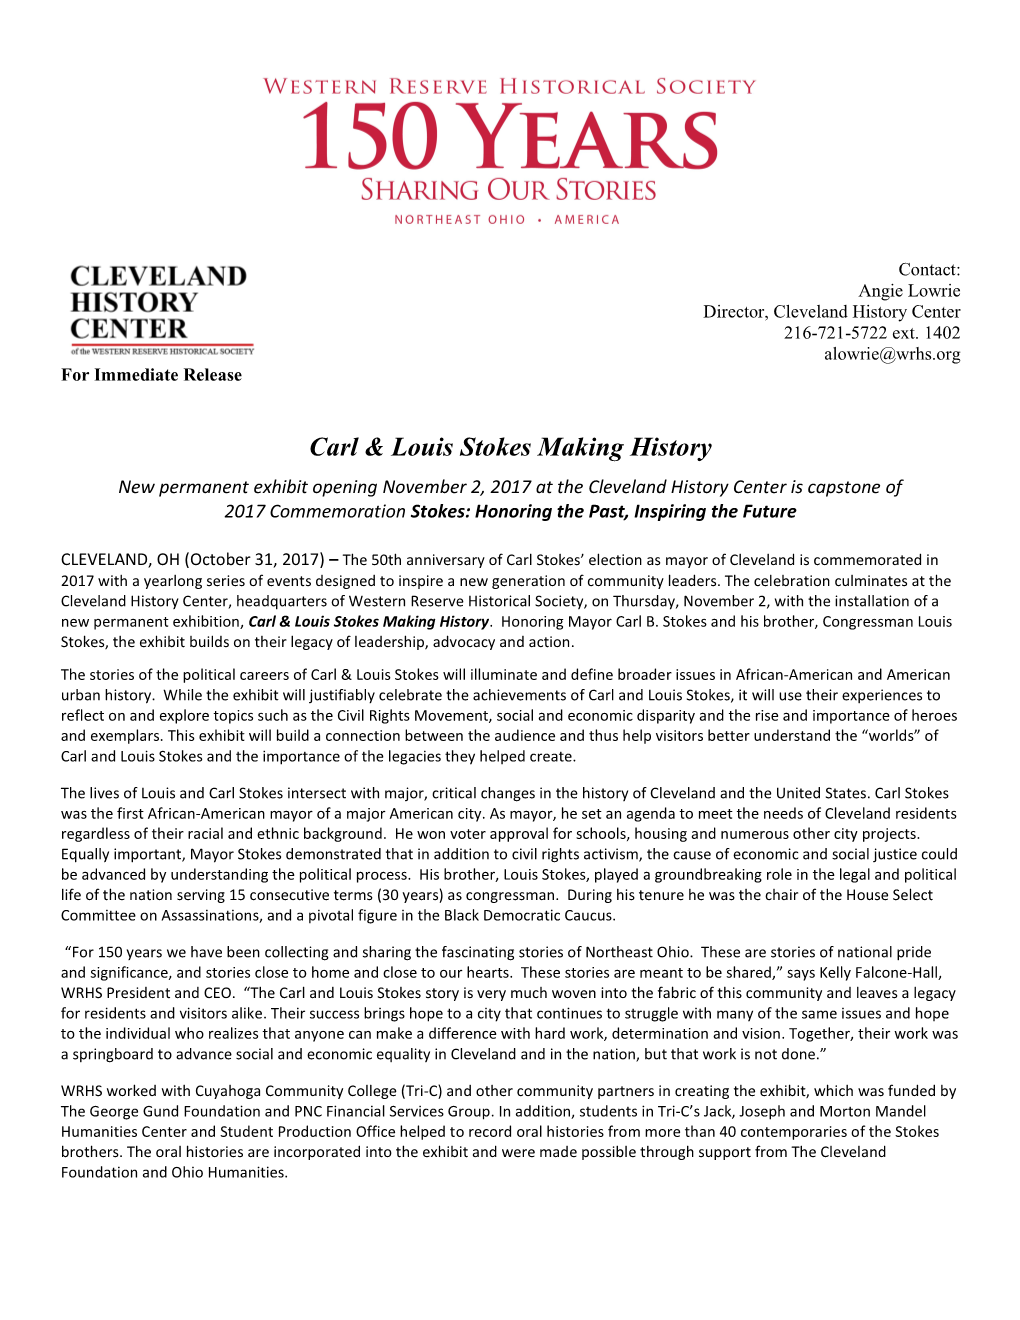 New Permanent Exhibit Opening November 2, 2017 at the Cleveland History Center Is Capstone of 2017 Commemoration Stokes: Honoring the Past, Inspiring the Future